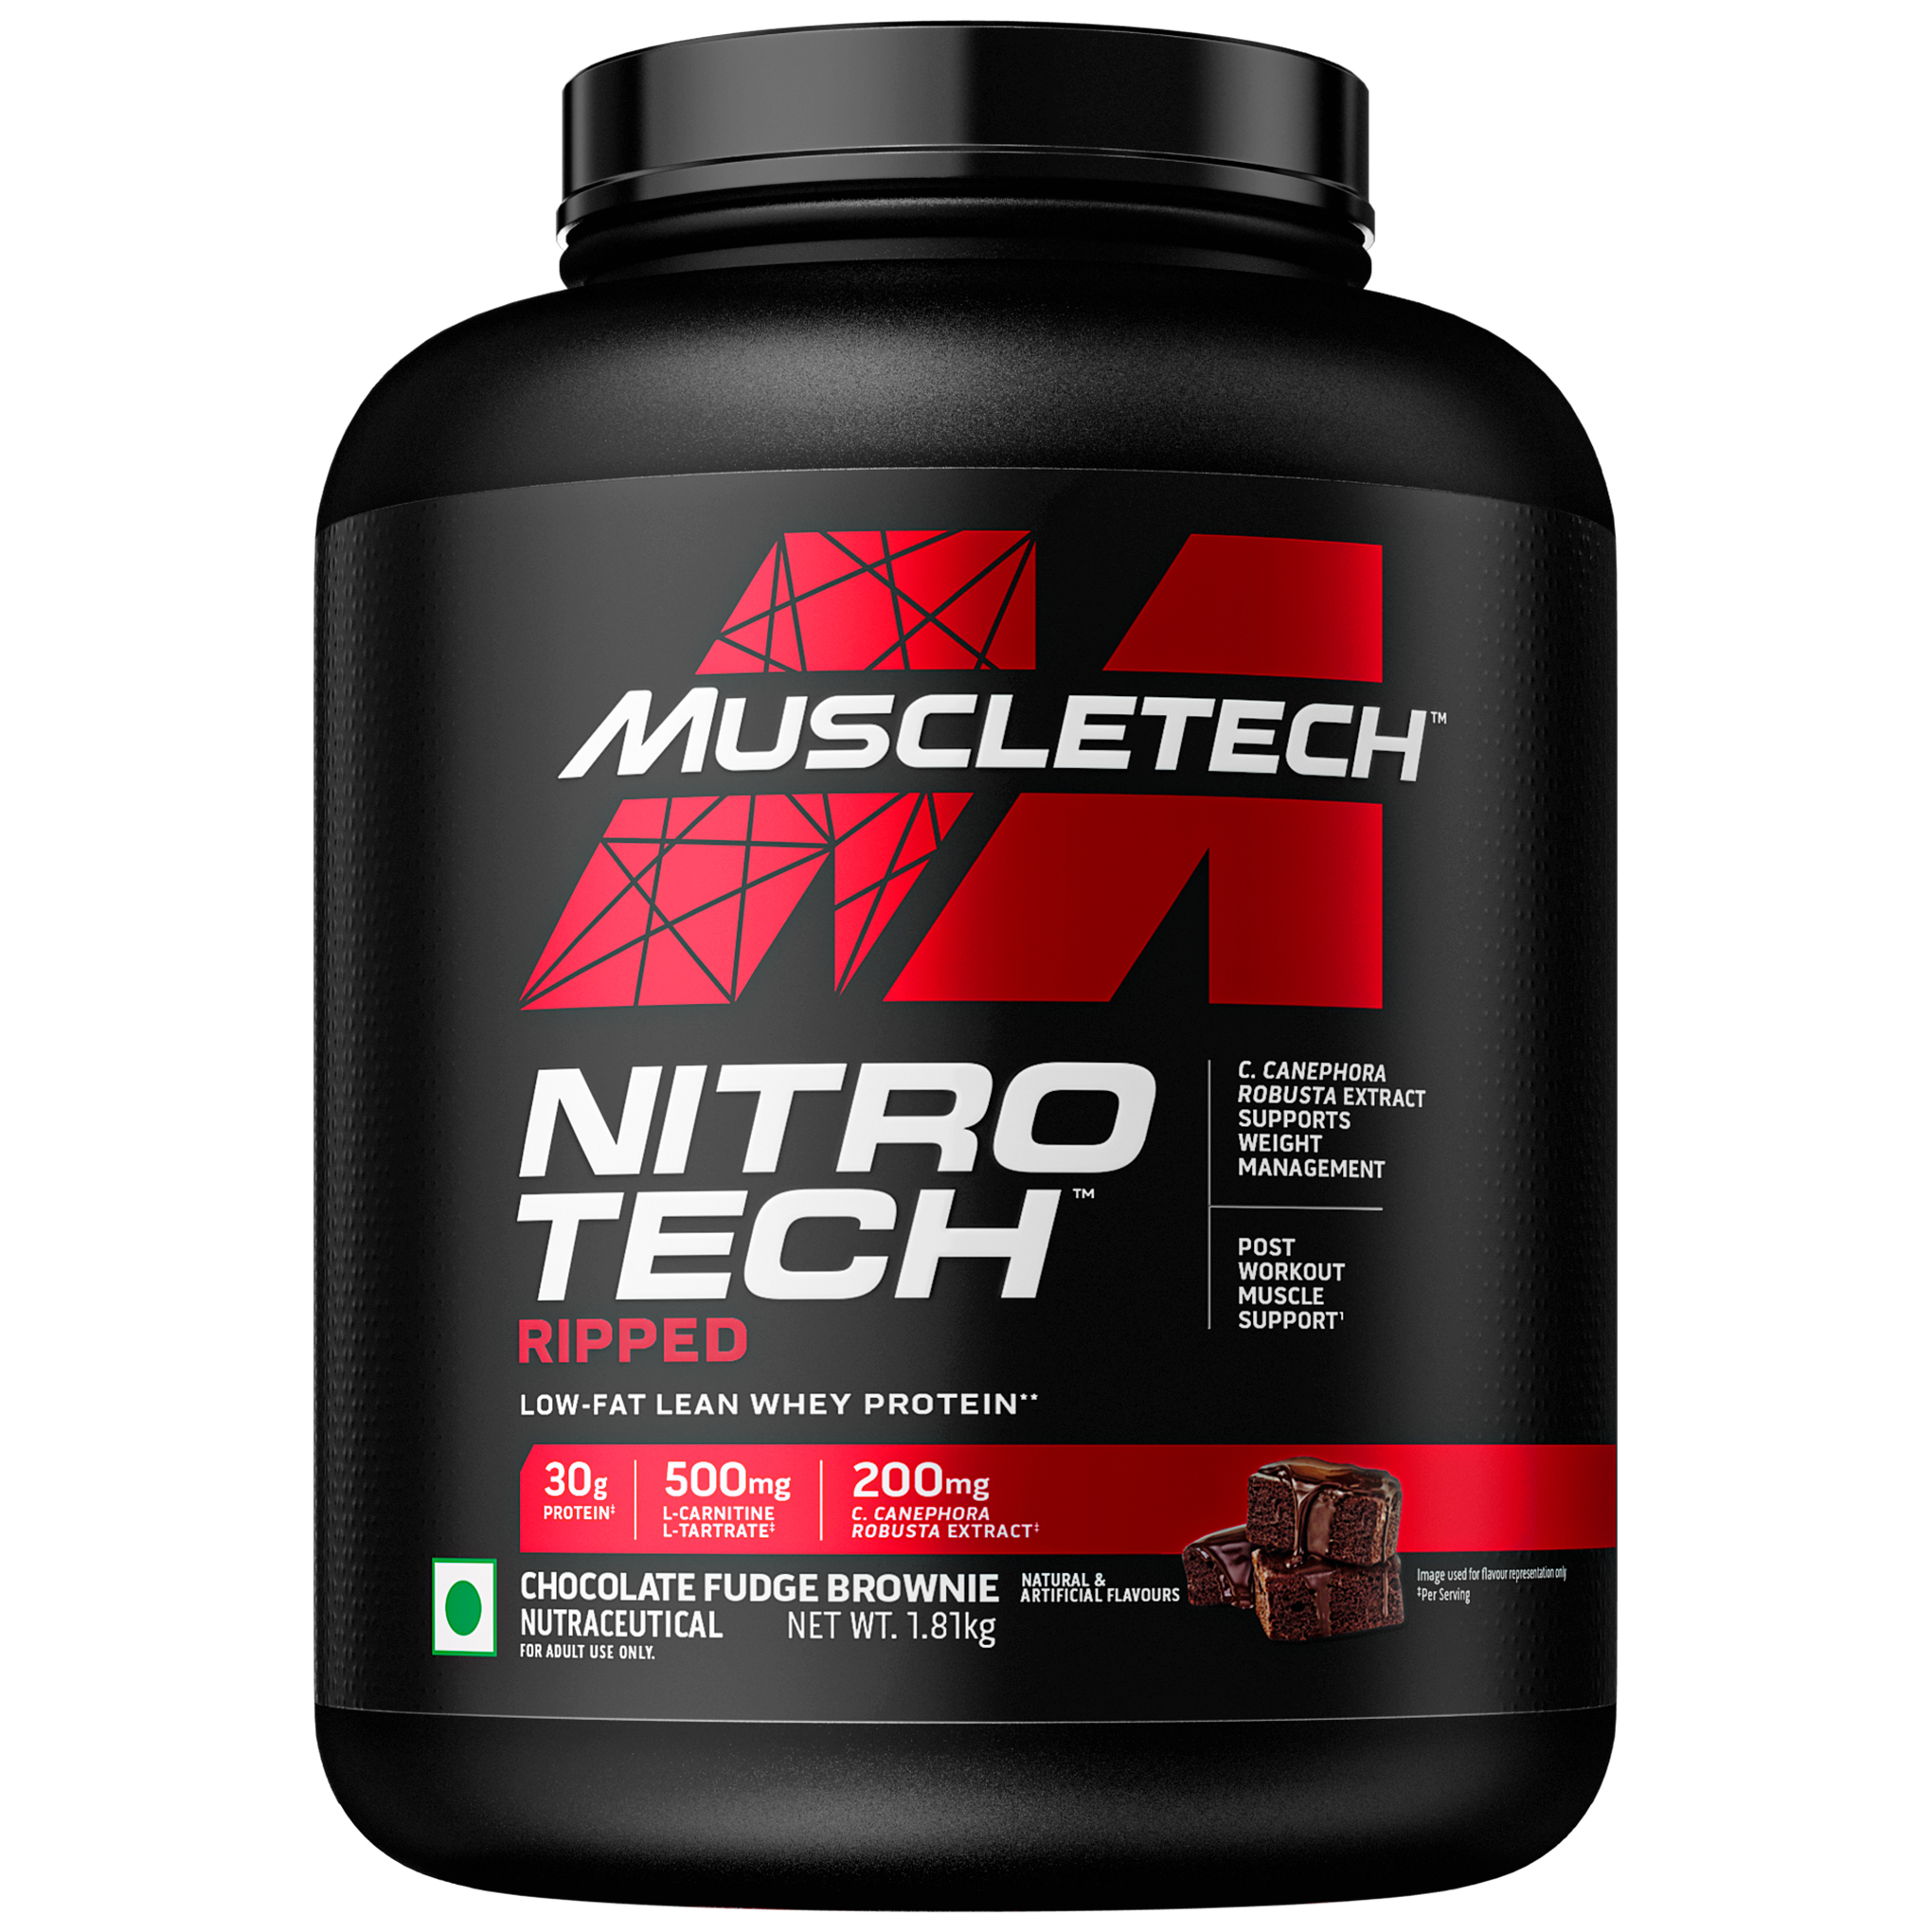 Muscletech Nitro Tech Ripped Protein + Weight loss